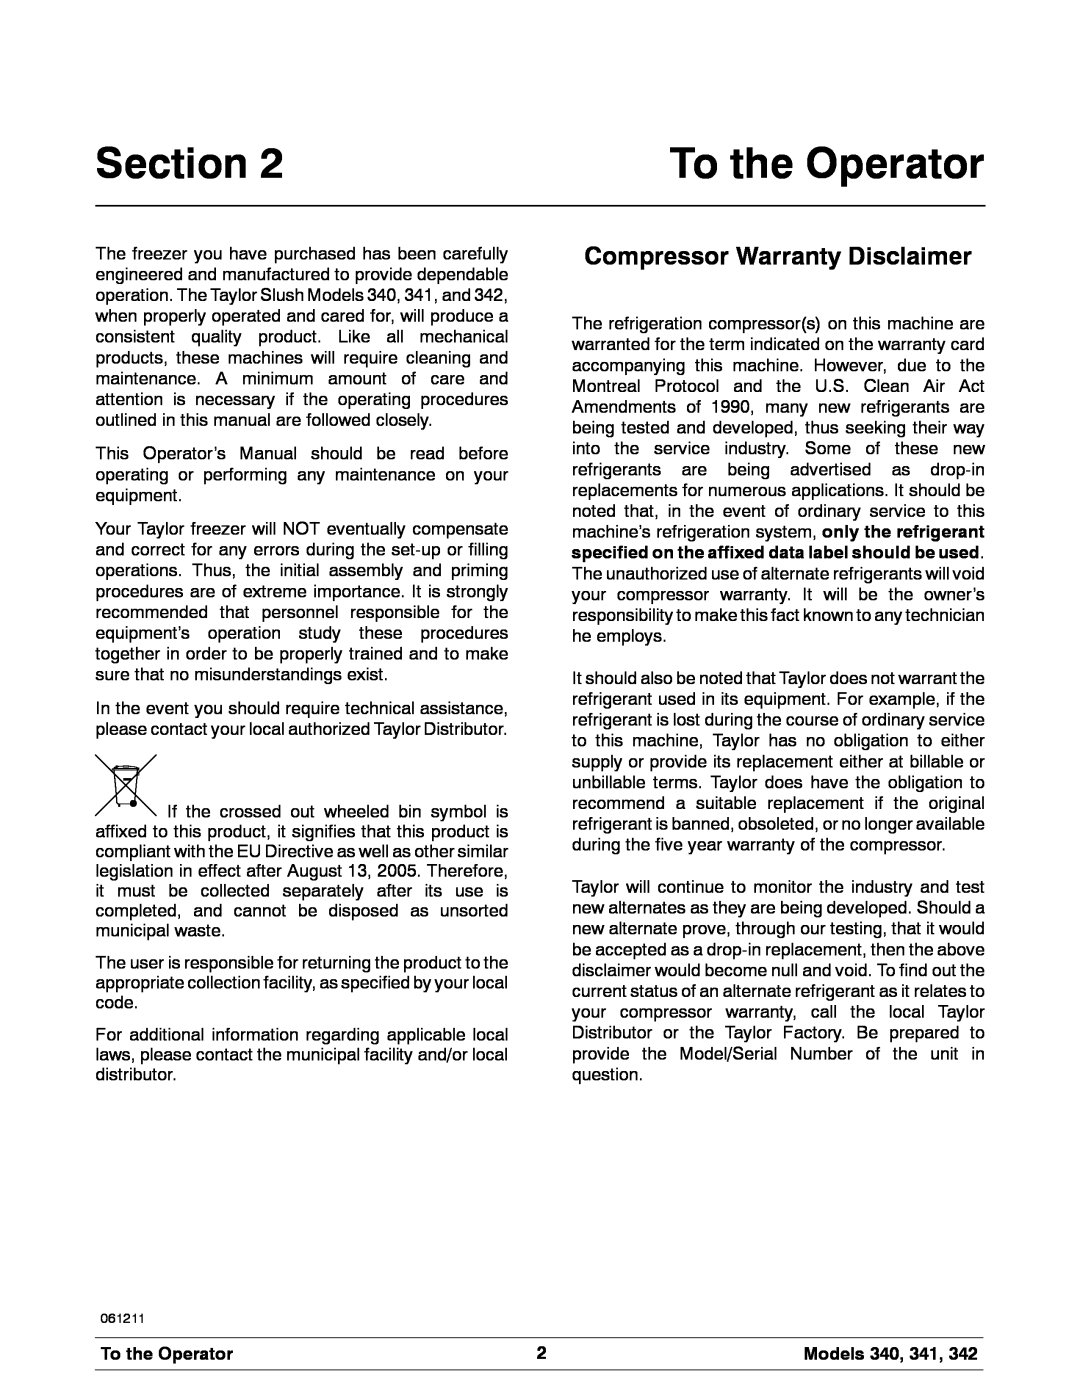 Taylor 342 manual To the Operator, Compressor Warranty Disclaimer, Section, Models 340, 341 